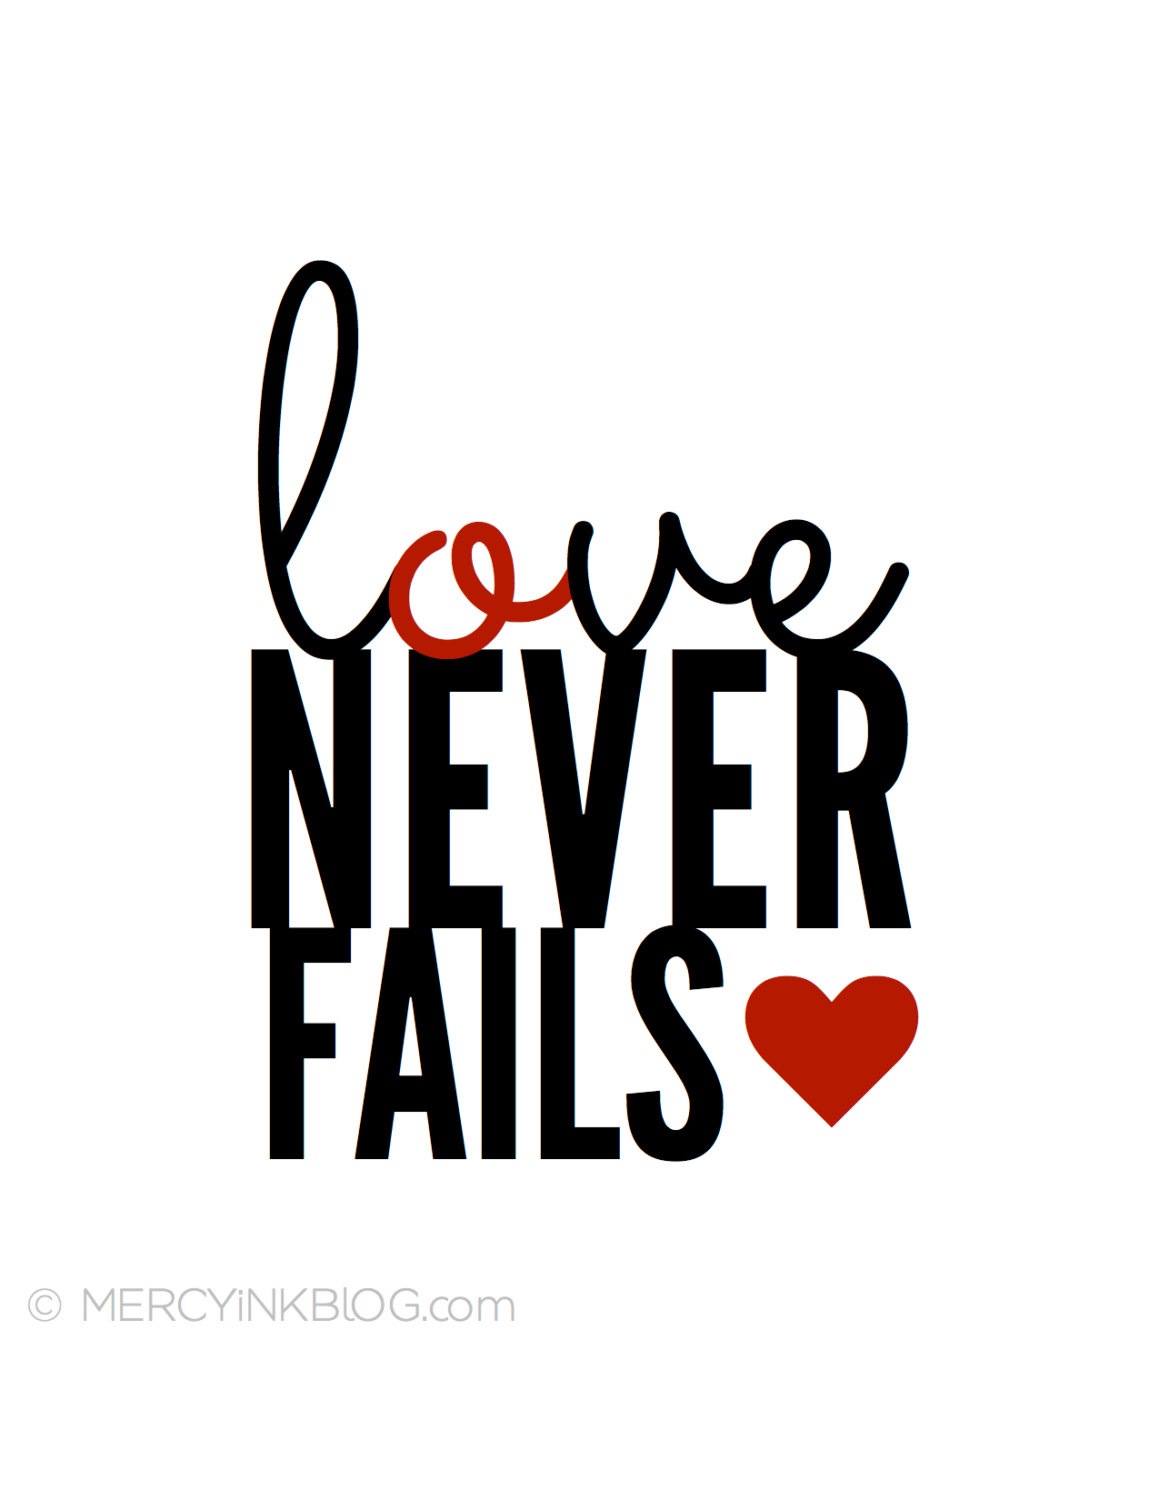 It s a never love. Love never fails. Never Love вокалист. Never Love never Love.